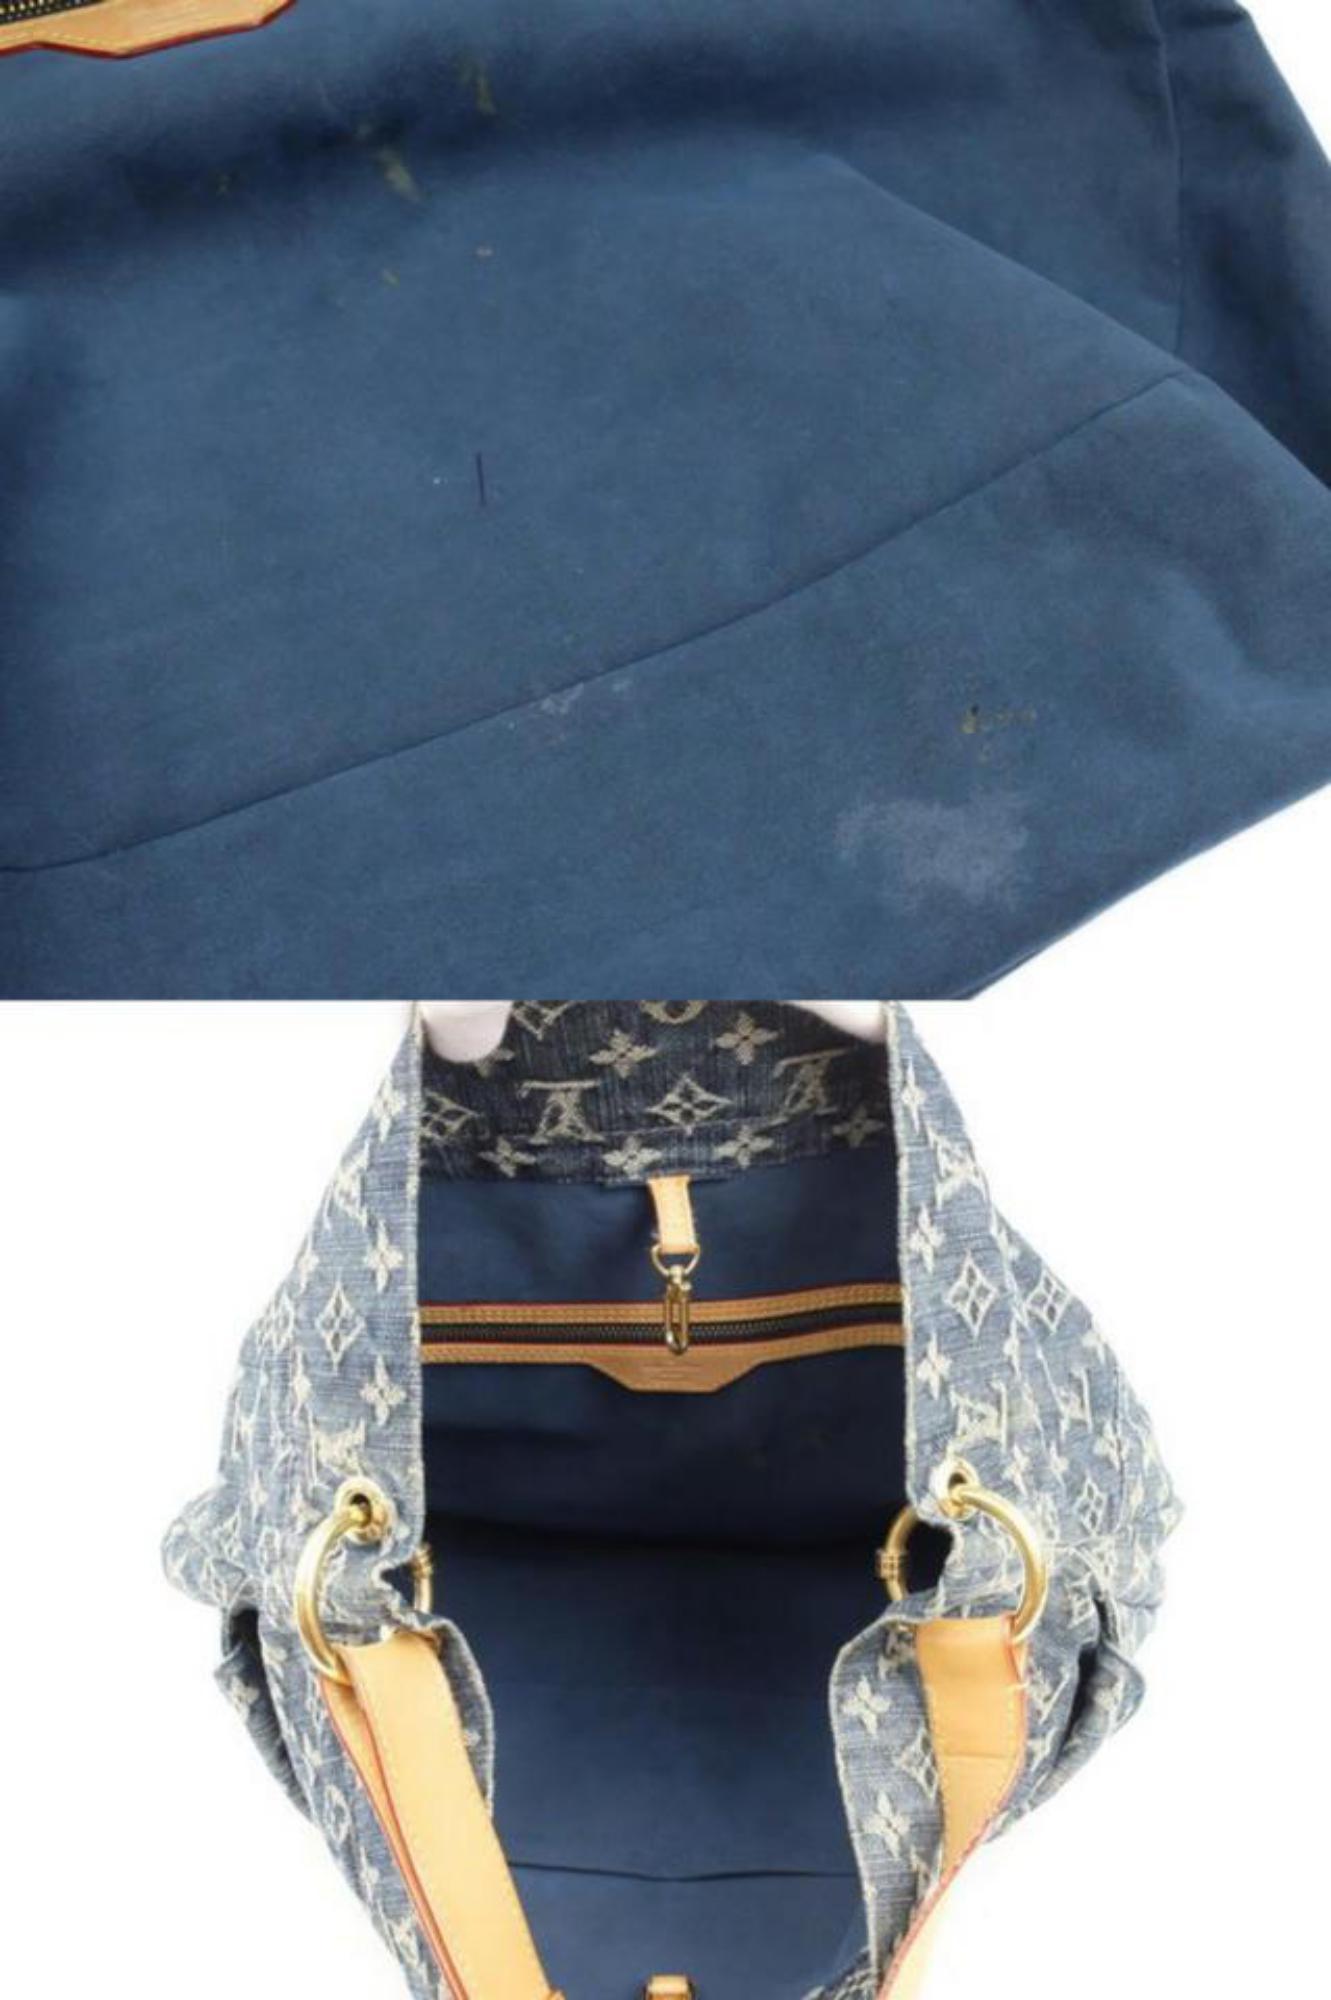 Louis Vuitton Monogram Denim Gm Hobo 225679 Blue Coated Canvas Shoulder Bag In Excellent Condition For Sale In Forest Hills, NY